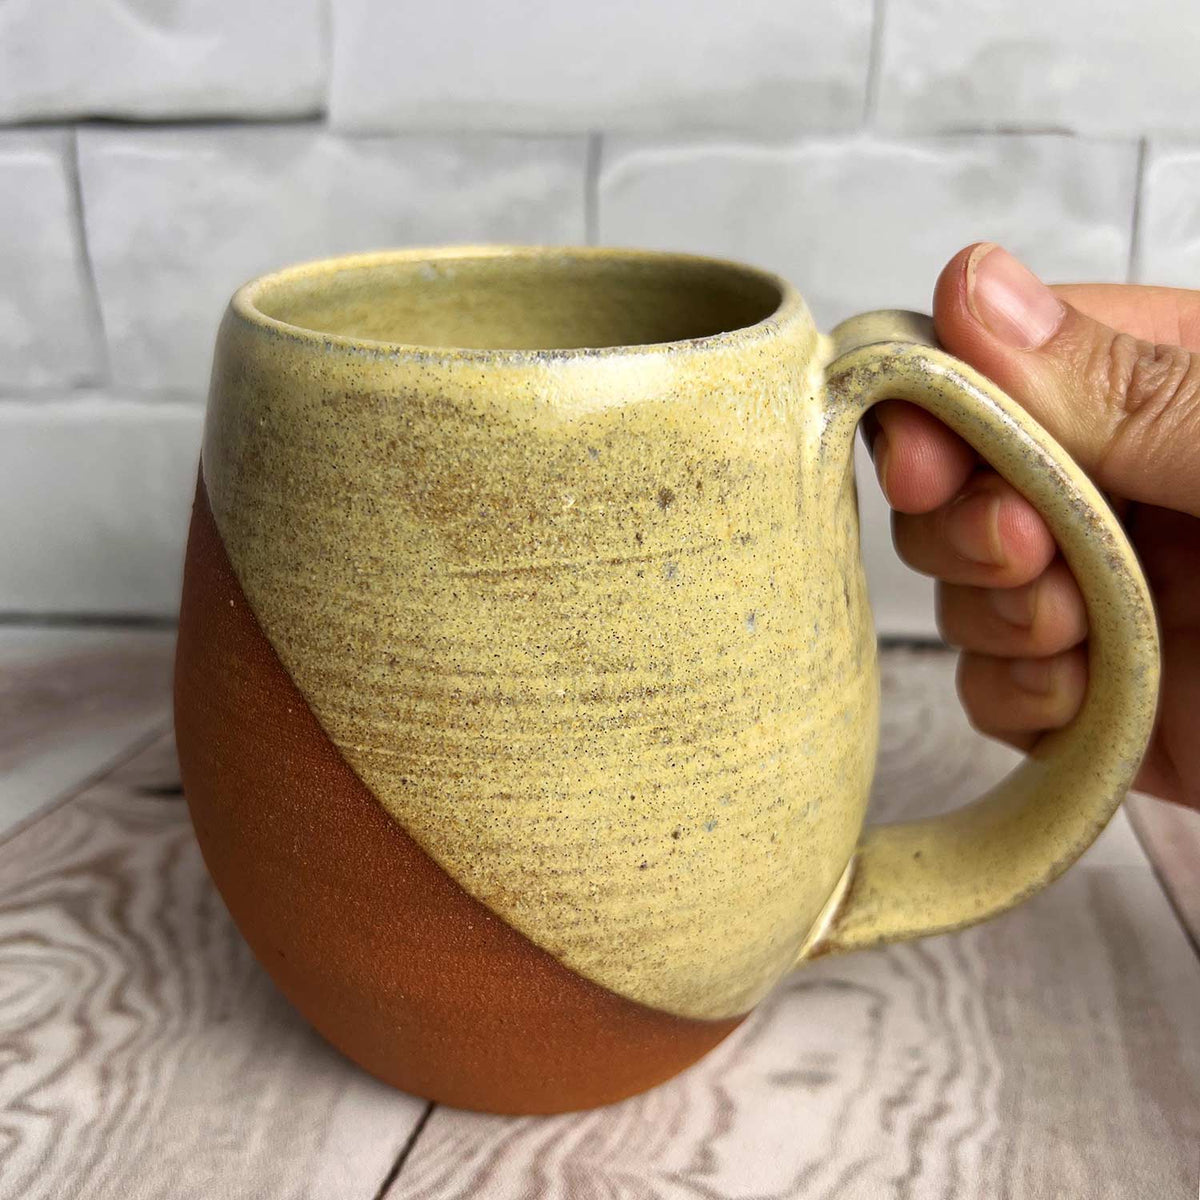 Fun Mug Handles Are the Best Pottery Trend